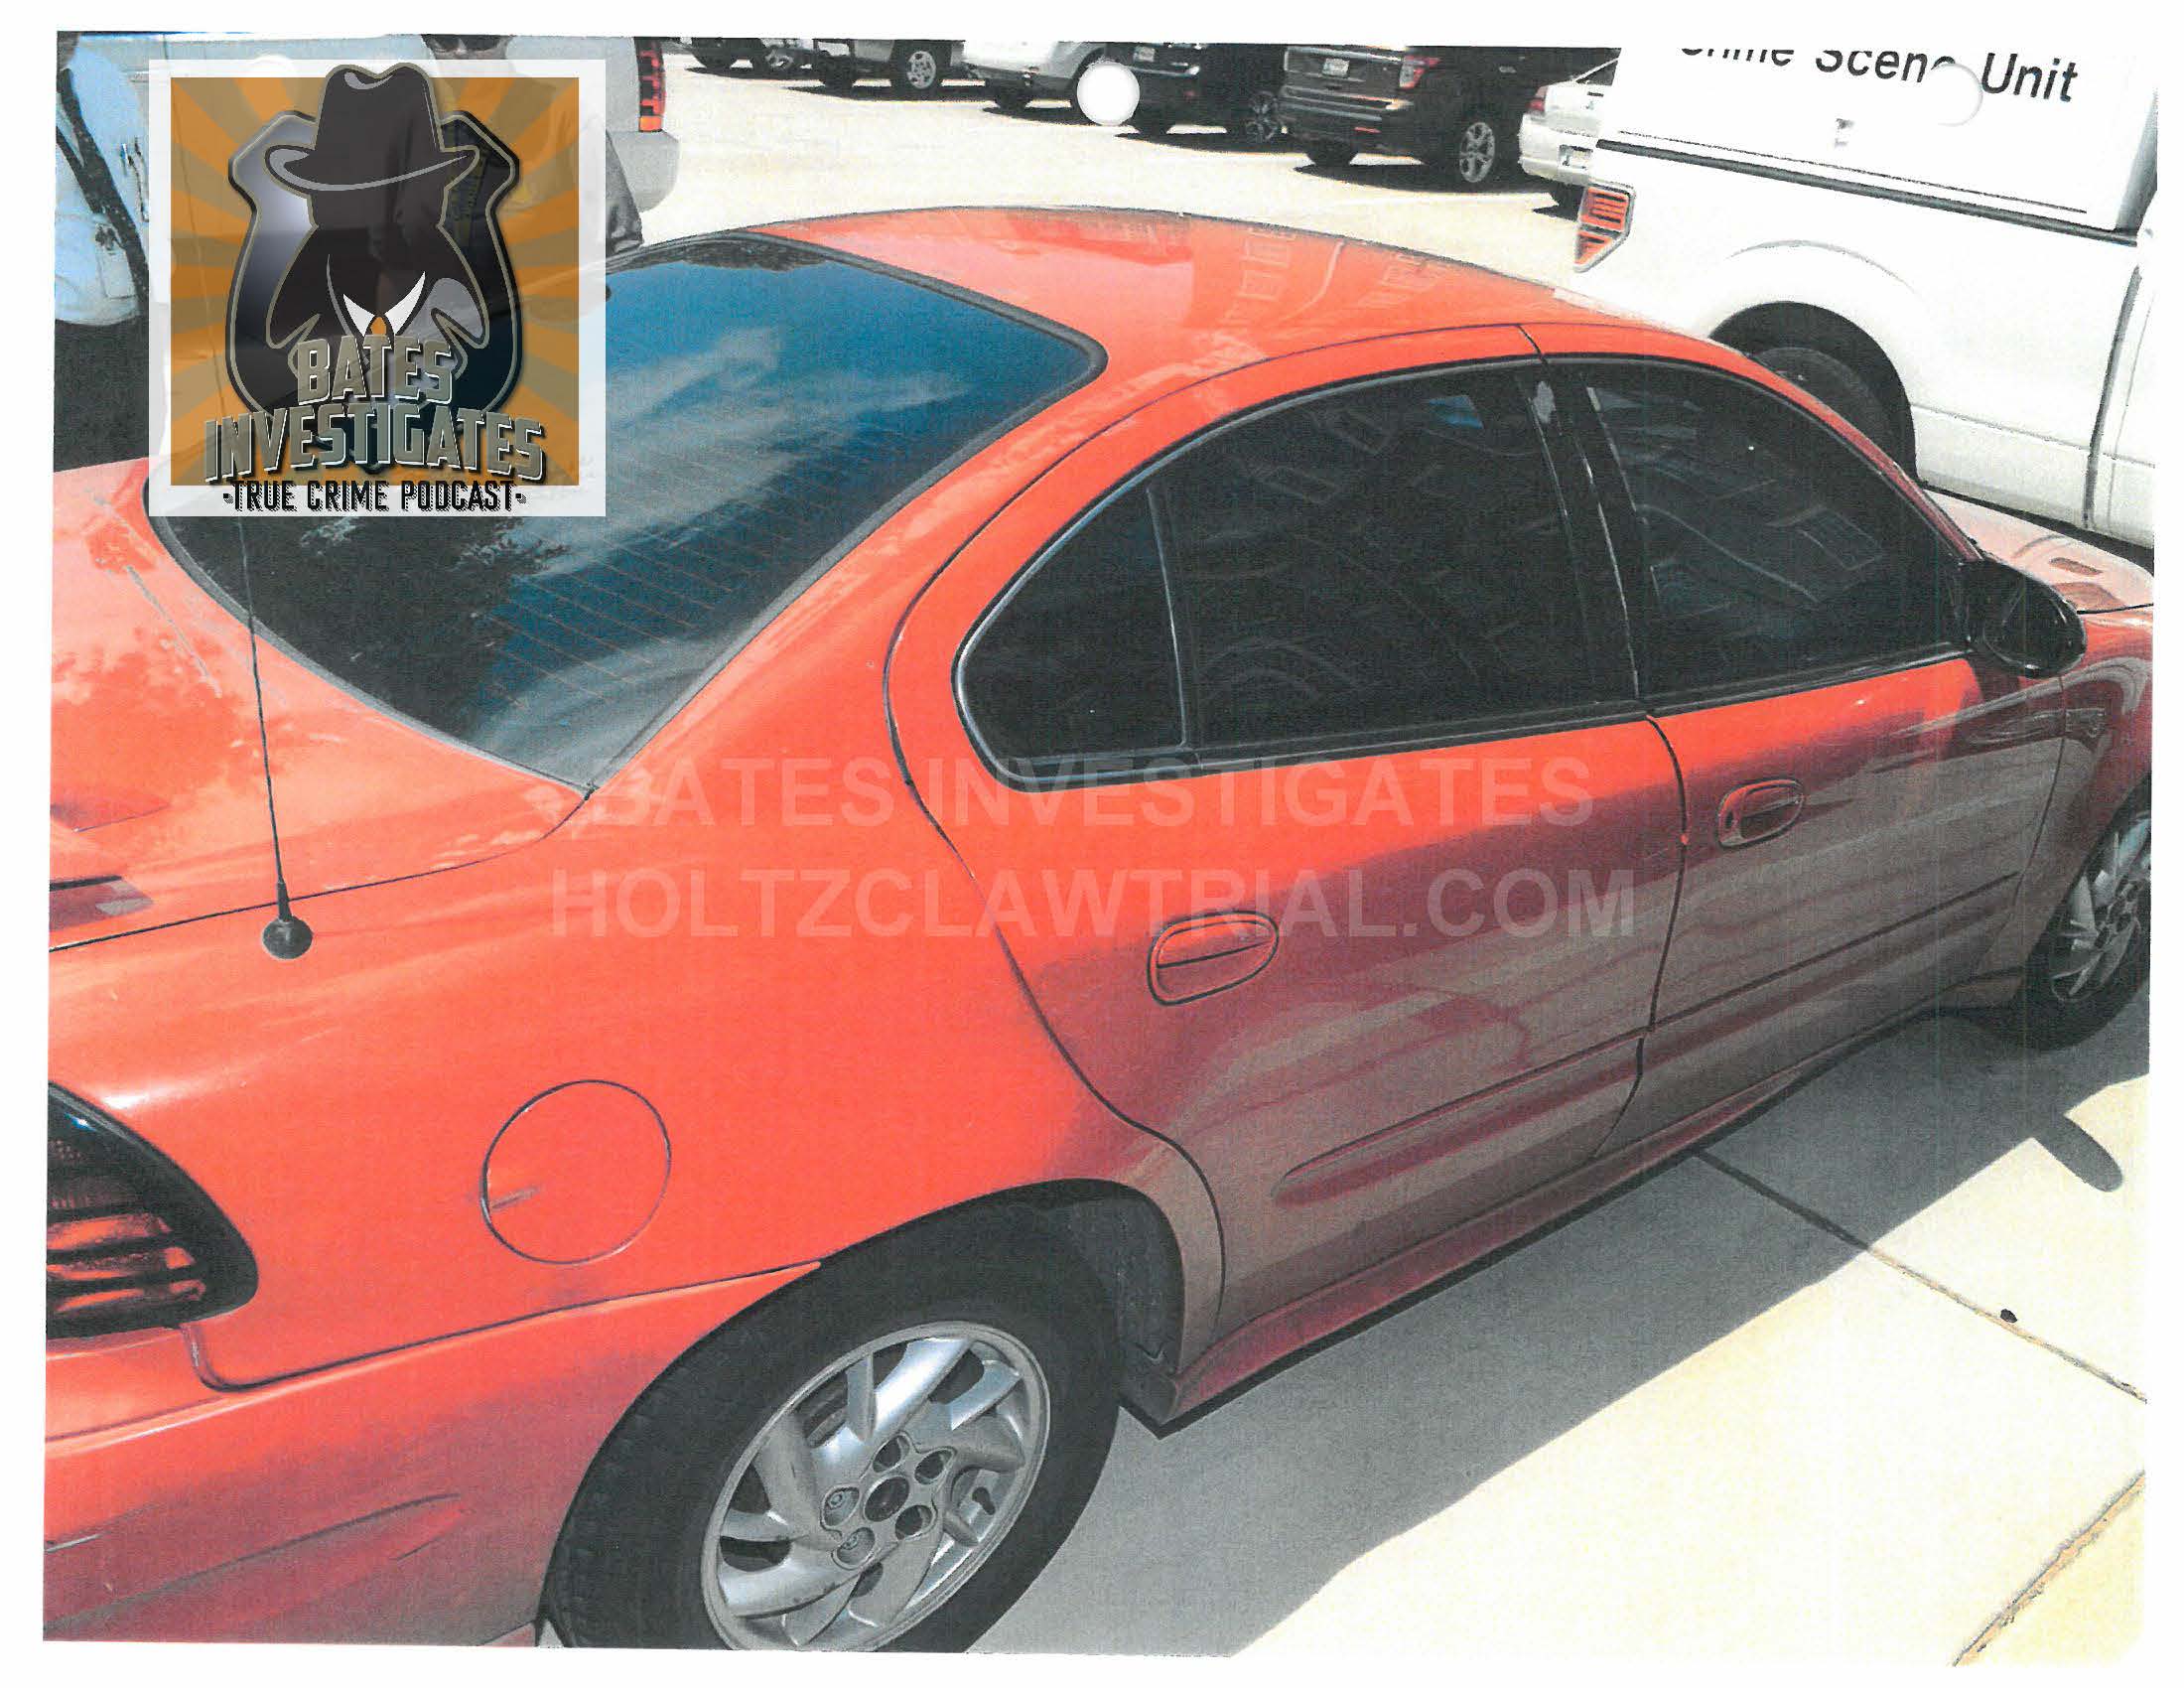 Holtzclaw Podcast Ep02 - Ligons Car - Watermarked_Page_03.jpg